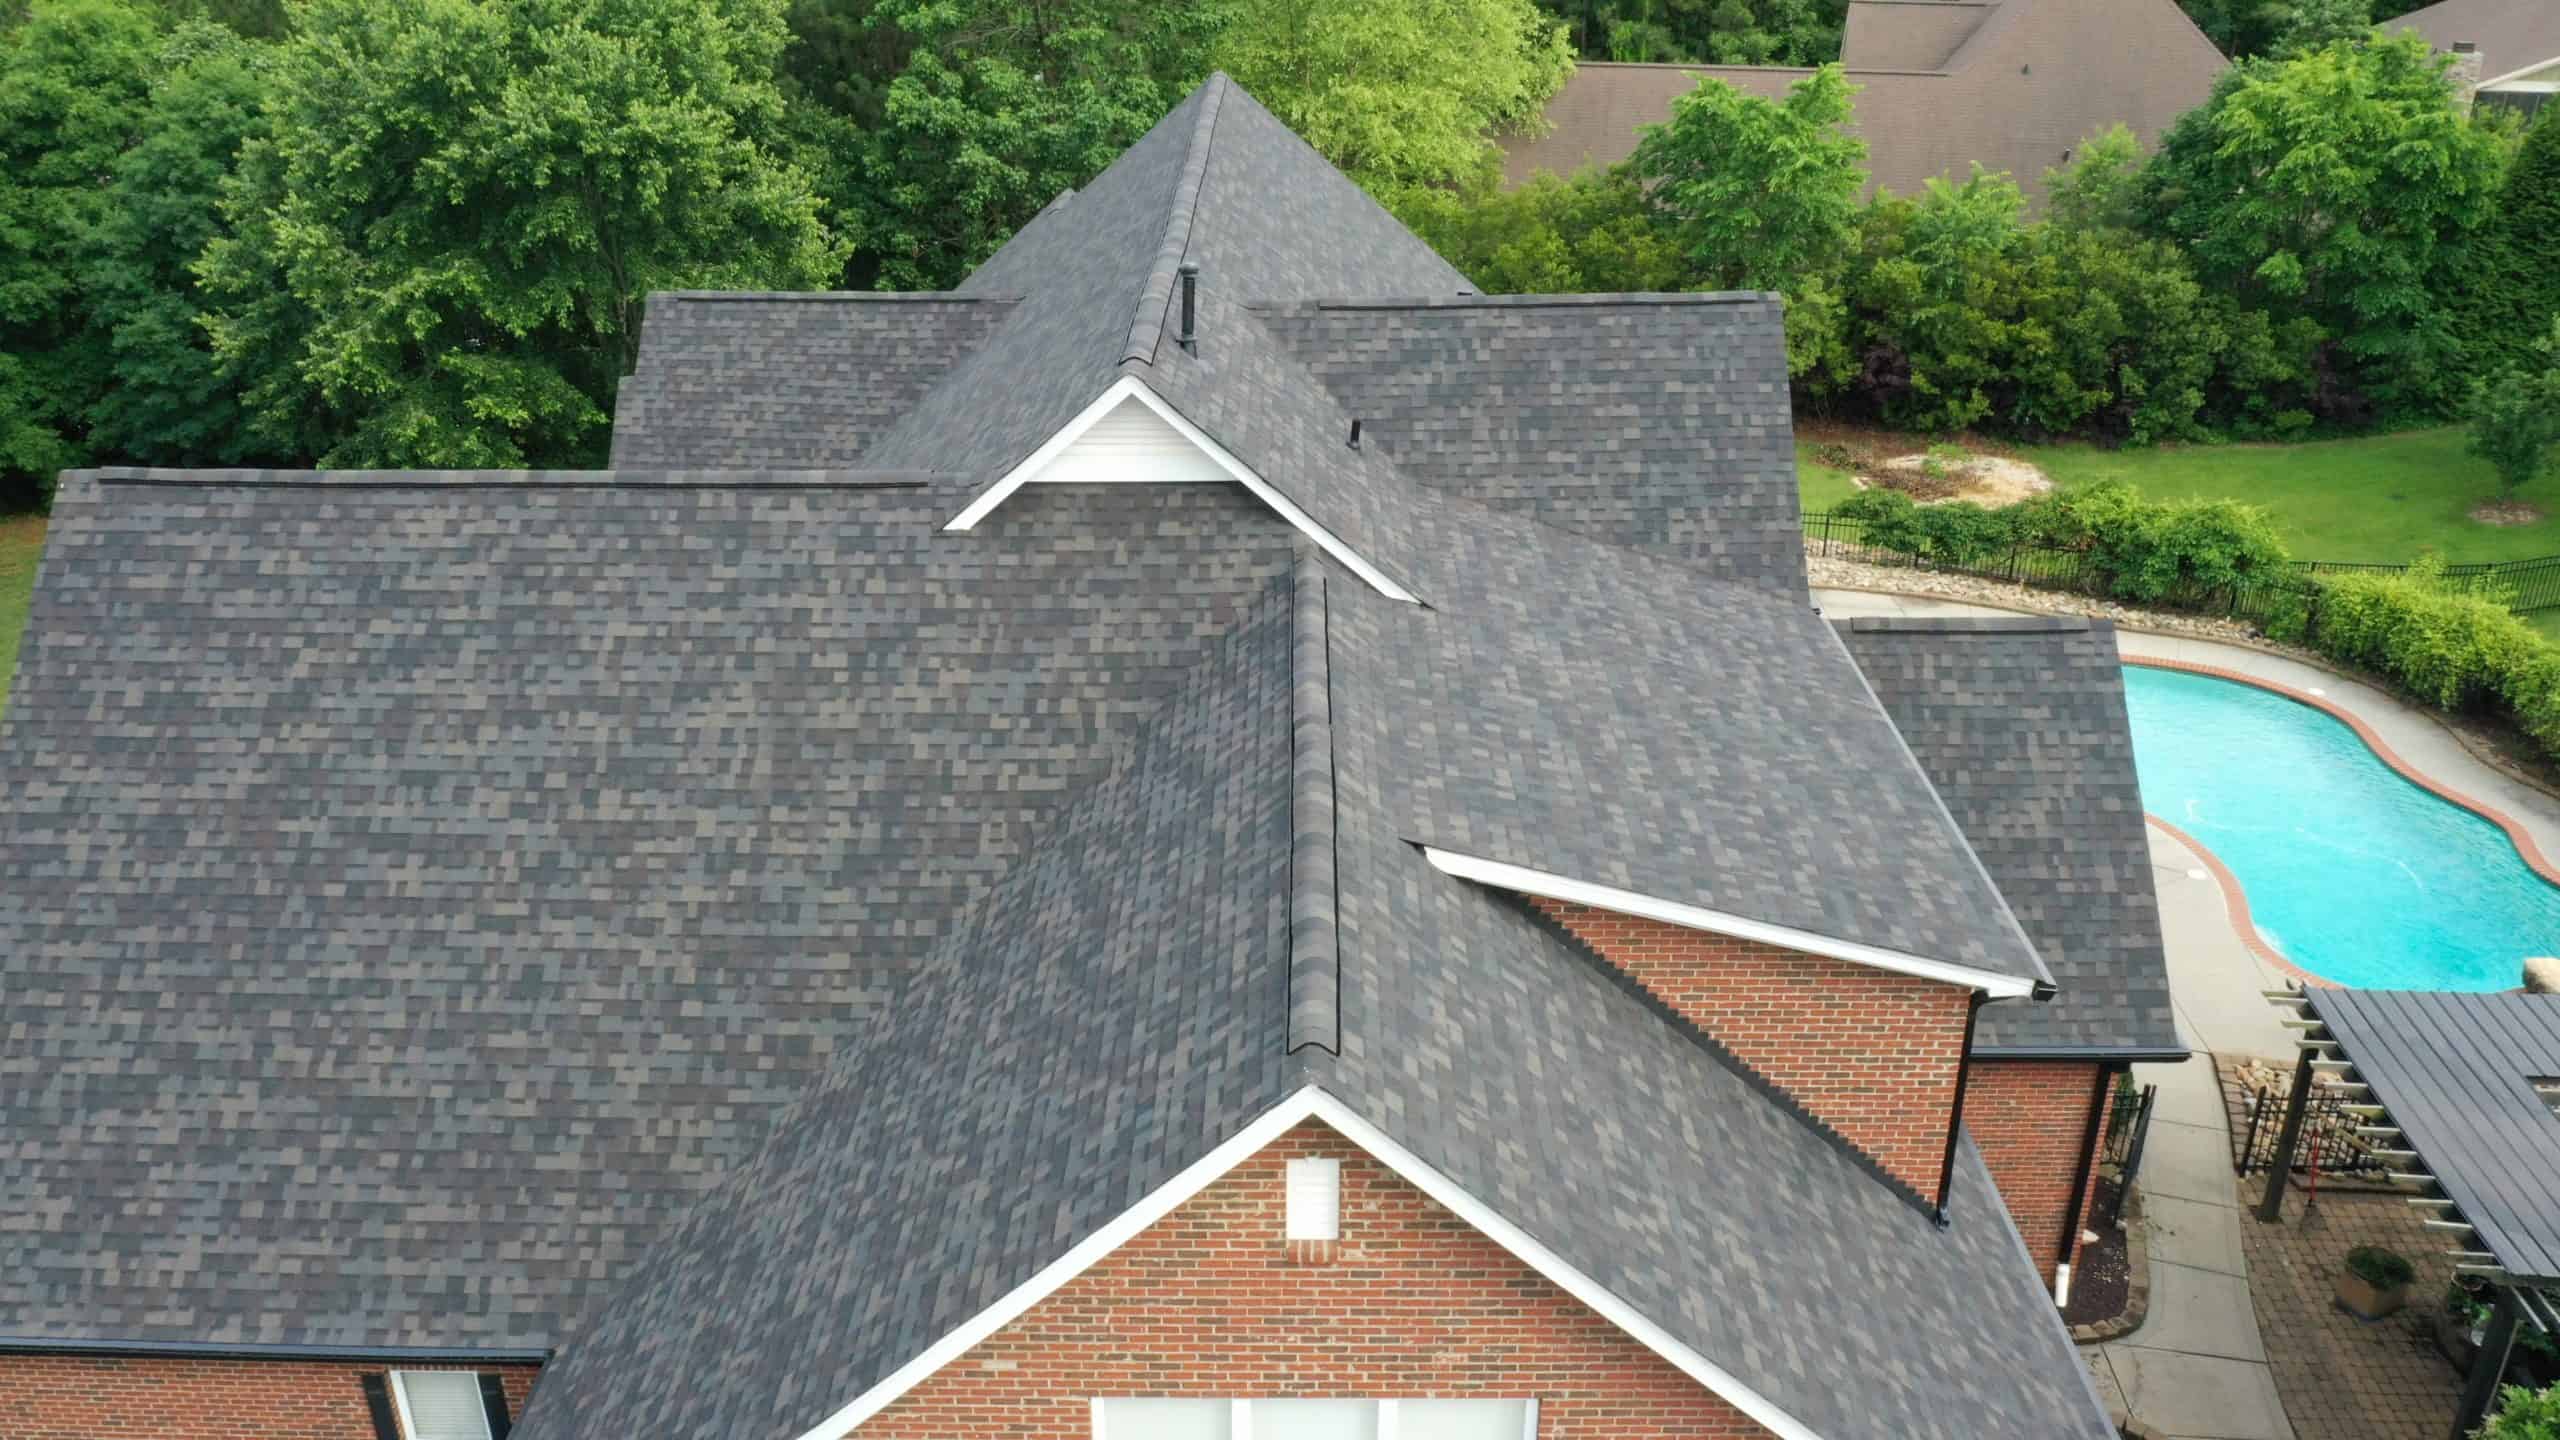 http://side%20aerial%20view%20of%20brick%20home%20with%20black%20sable%20duration%20shingles%20and%20pool